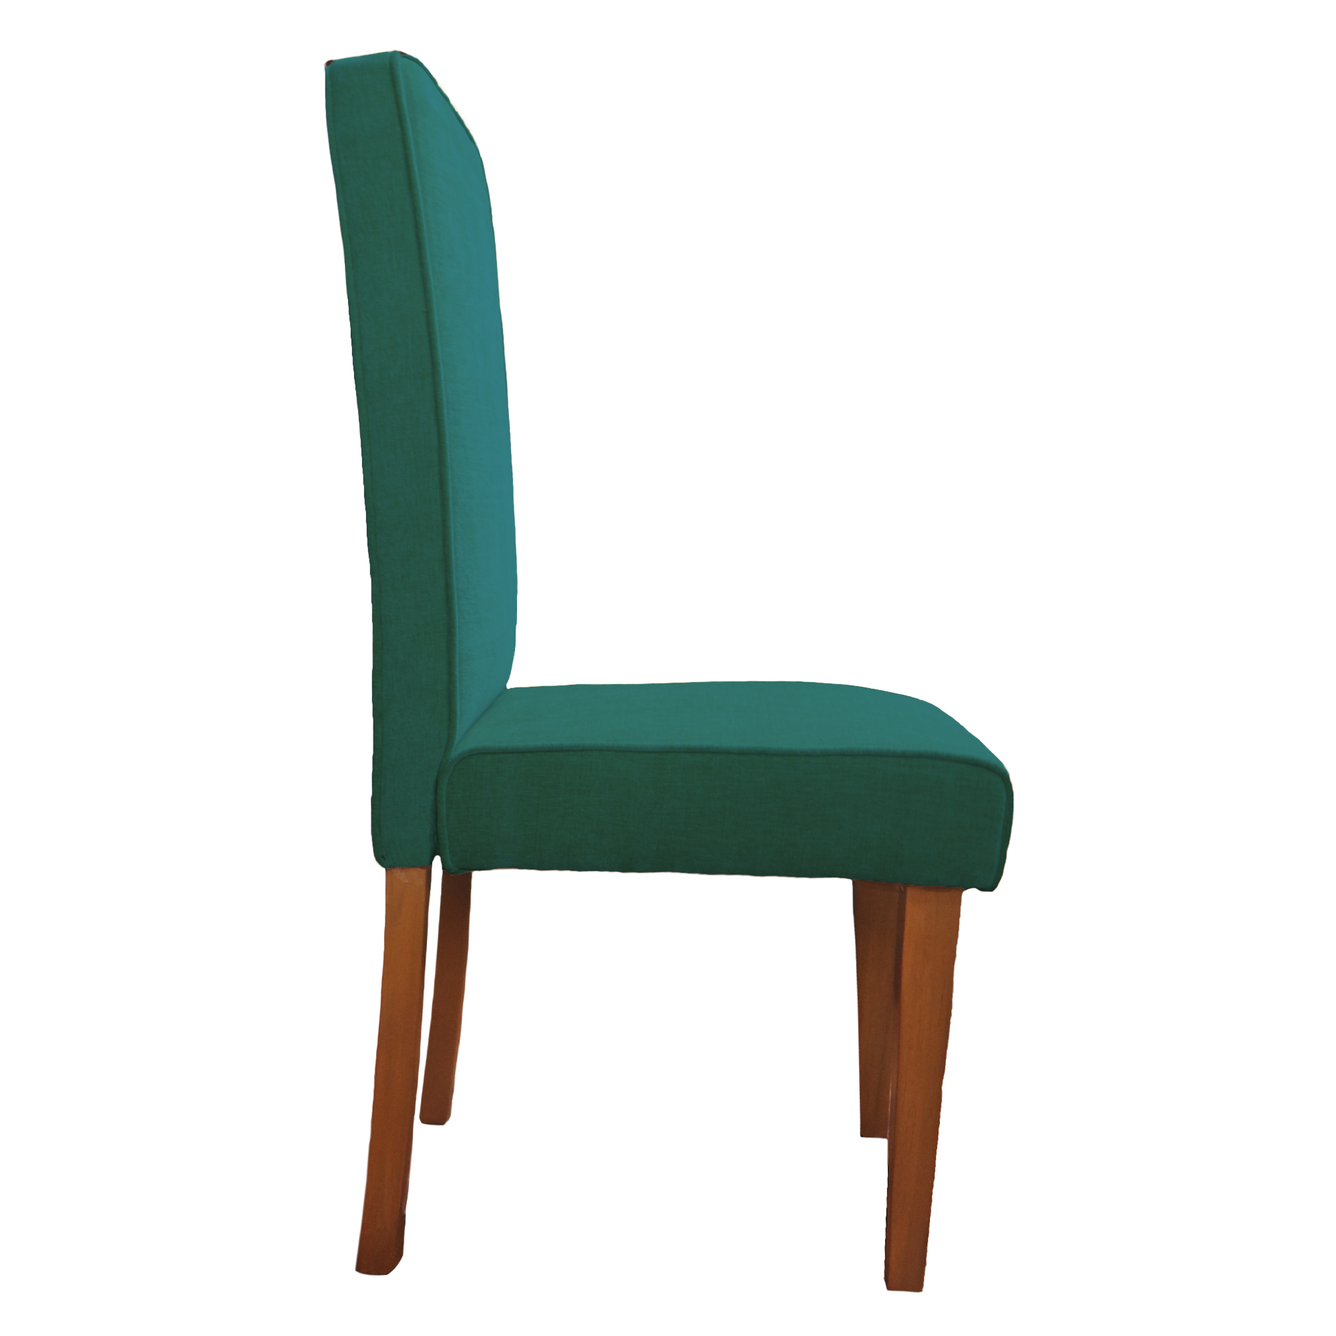 Emerald Green Full Back Solid Wood Dining Chair